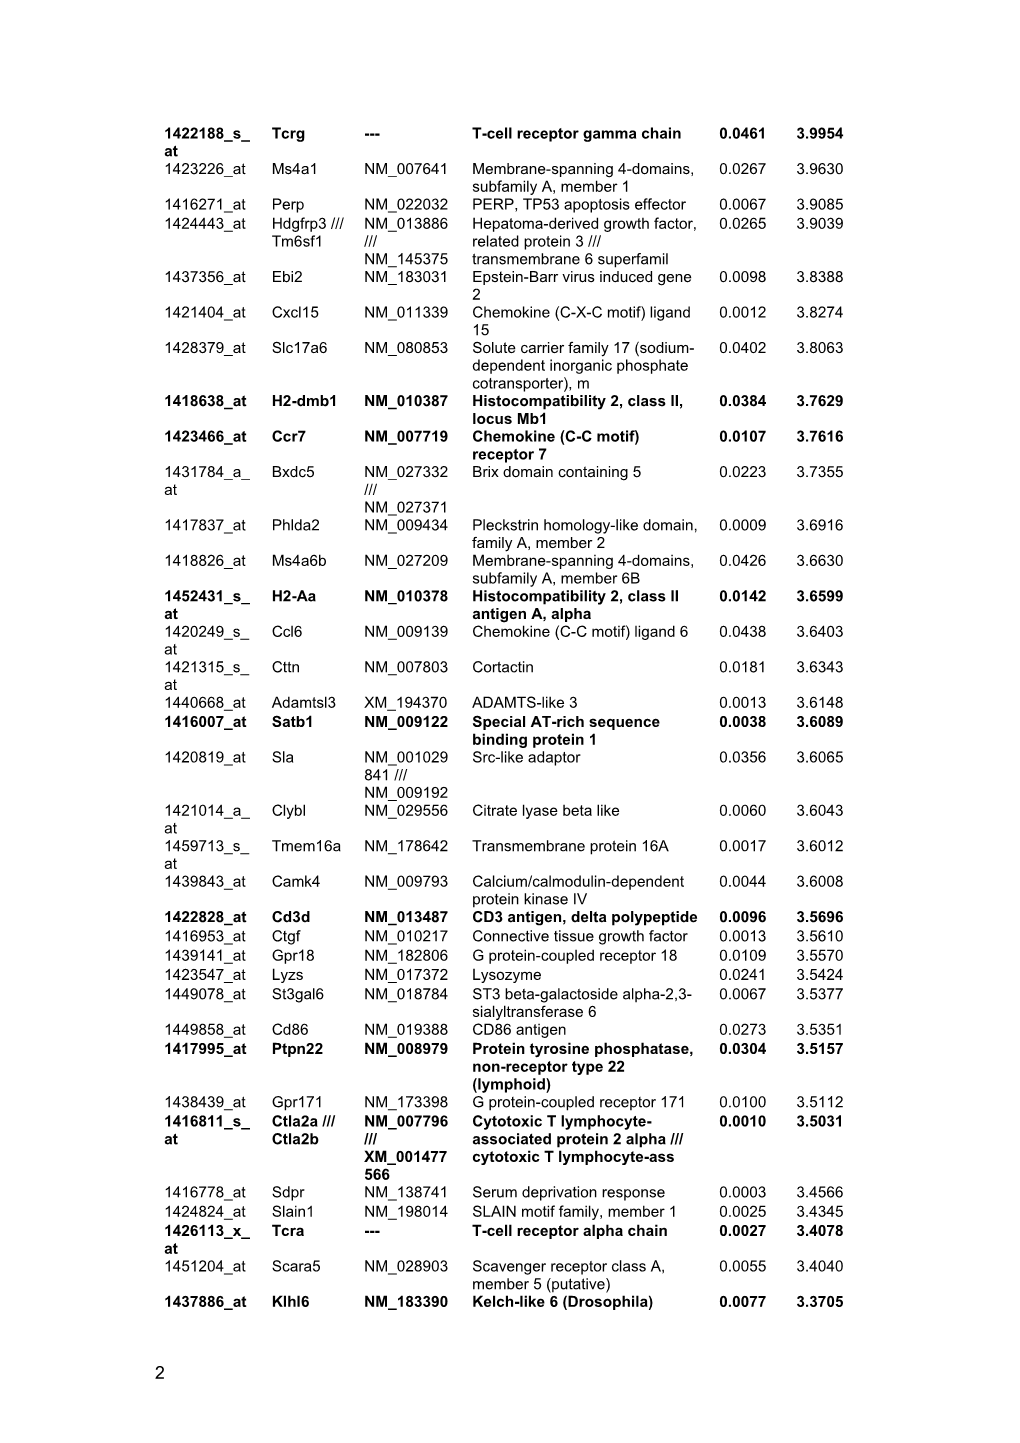 Supplementary Table 1. Genes Altered by BMP4 in Whole Tumor Samples. Genes in Bold Are